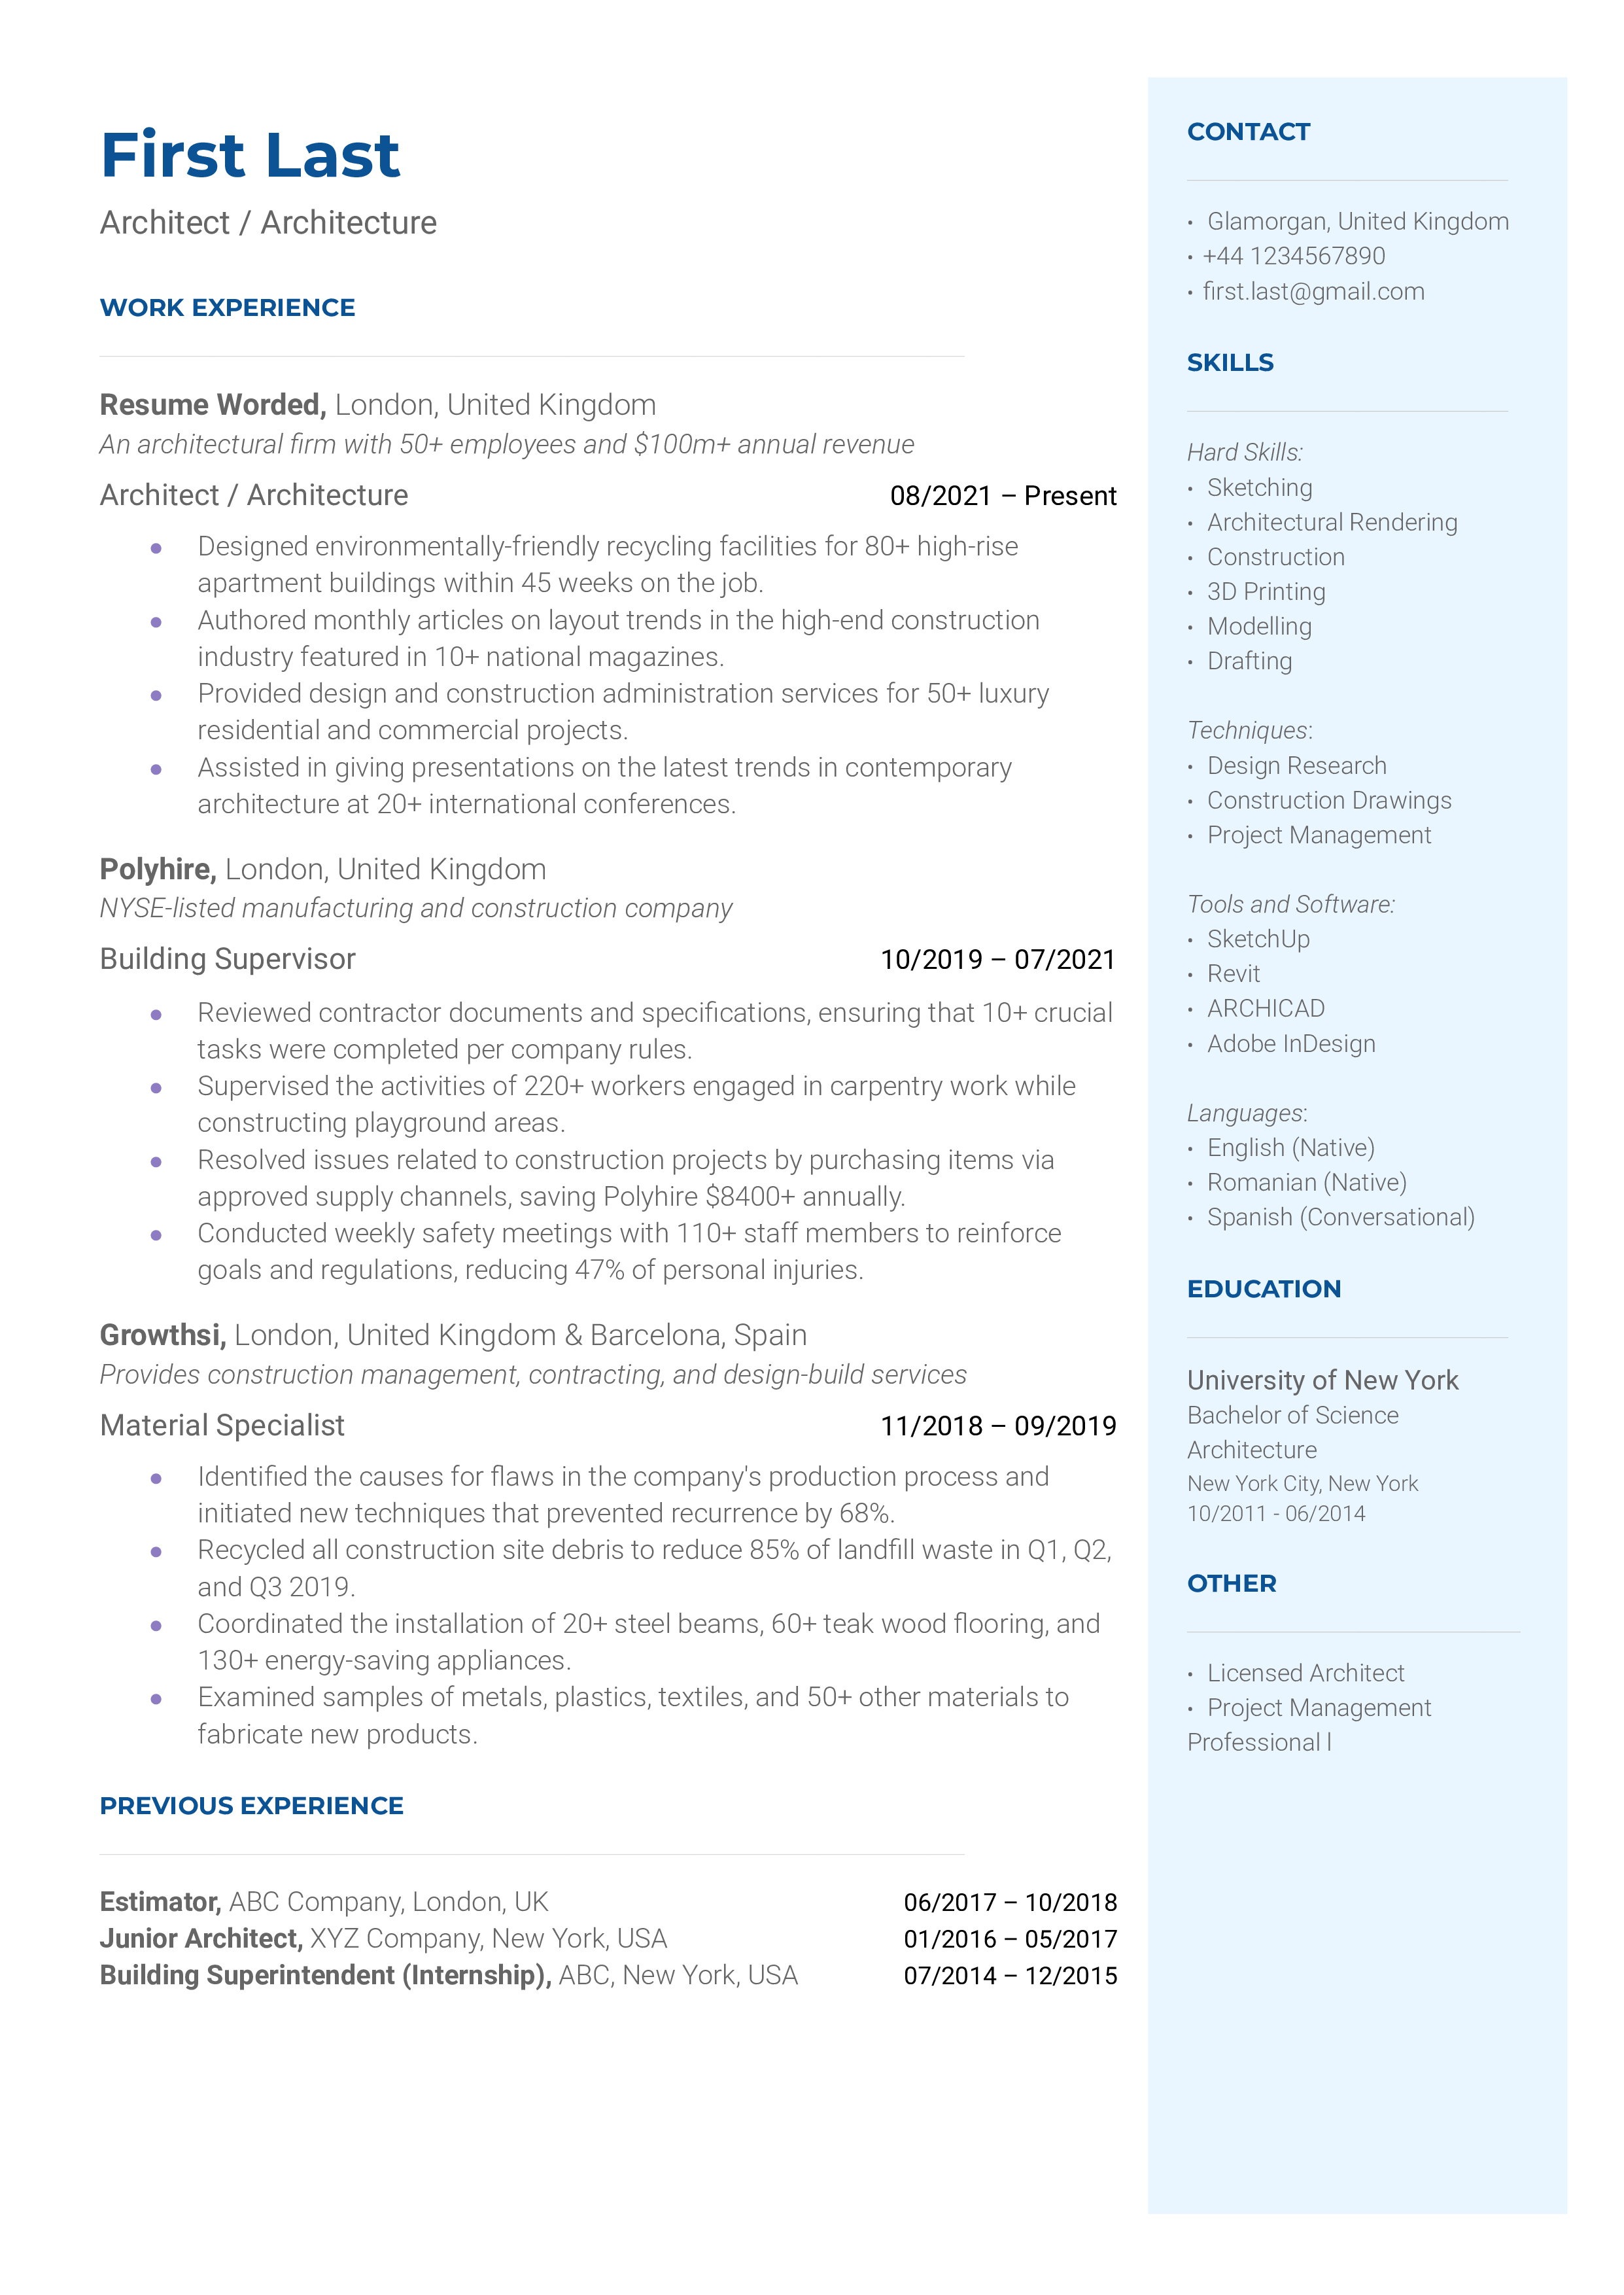 Architect resume showcasing software proficiency and sustainable design experience.